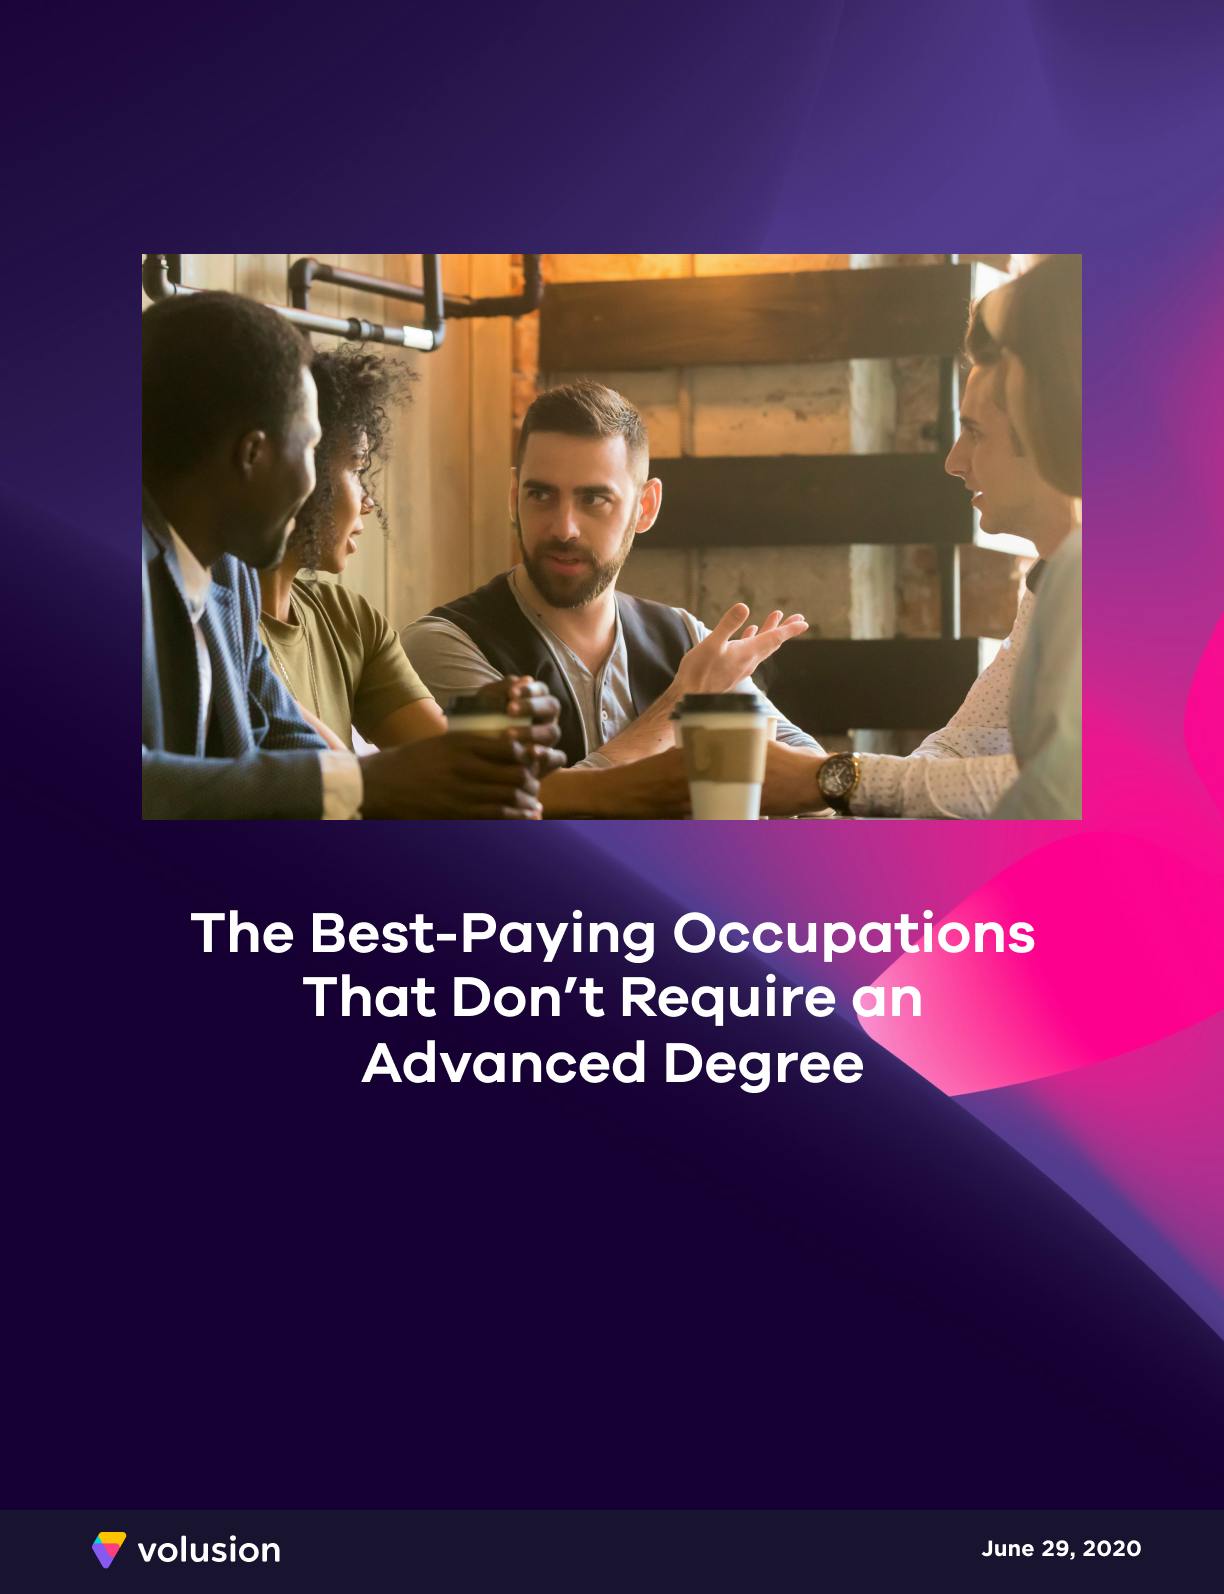 The Best-Paying Occupations That Don't Require an Advanced Degree